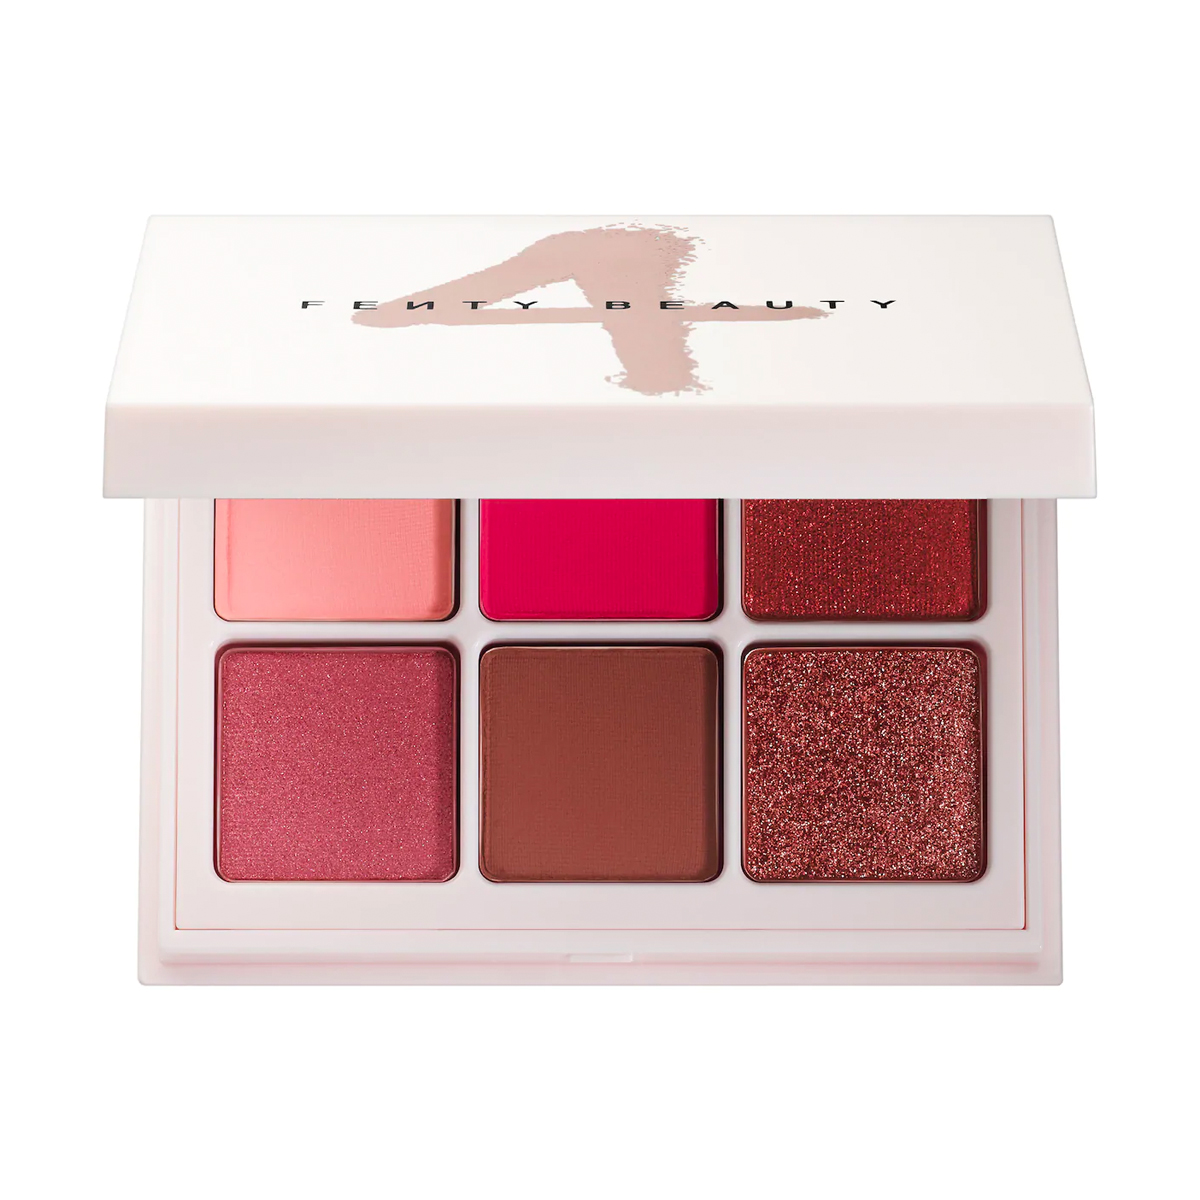 Fenty Beauty Snap Shadows Mix & Match Eyeshadow Palette in Rose